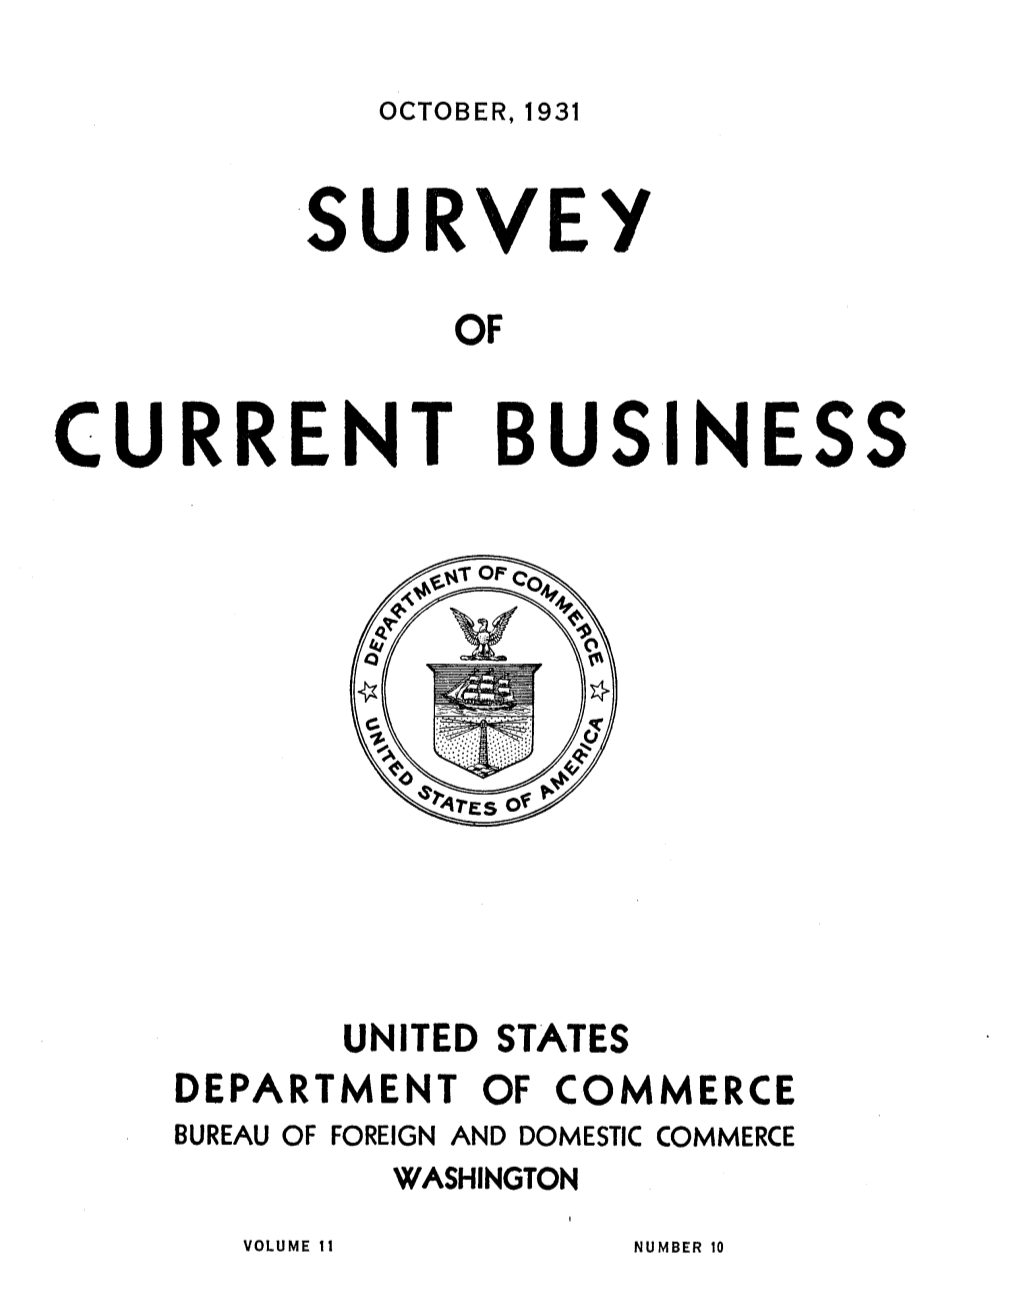 Survey of Current Business October 1931